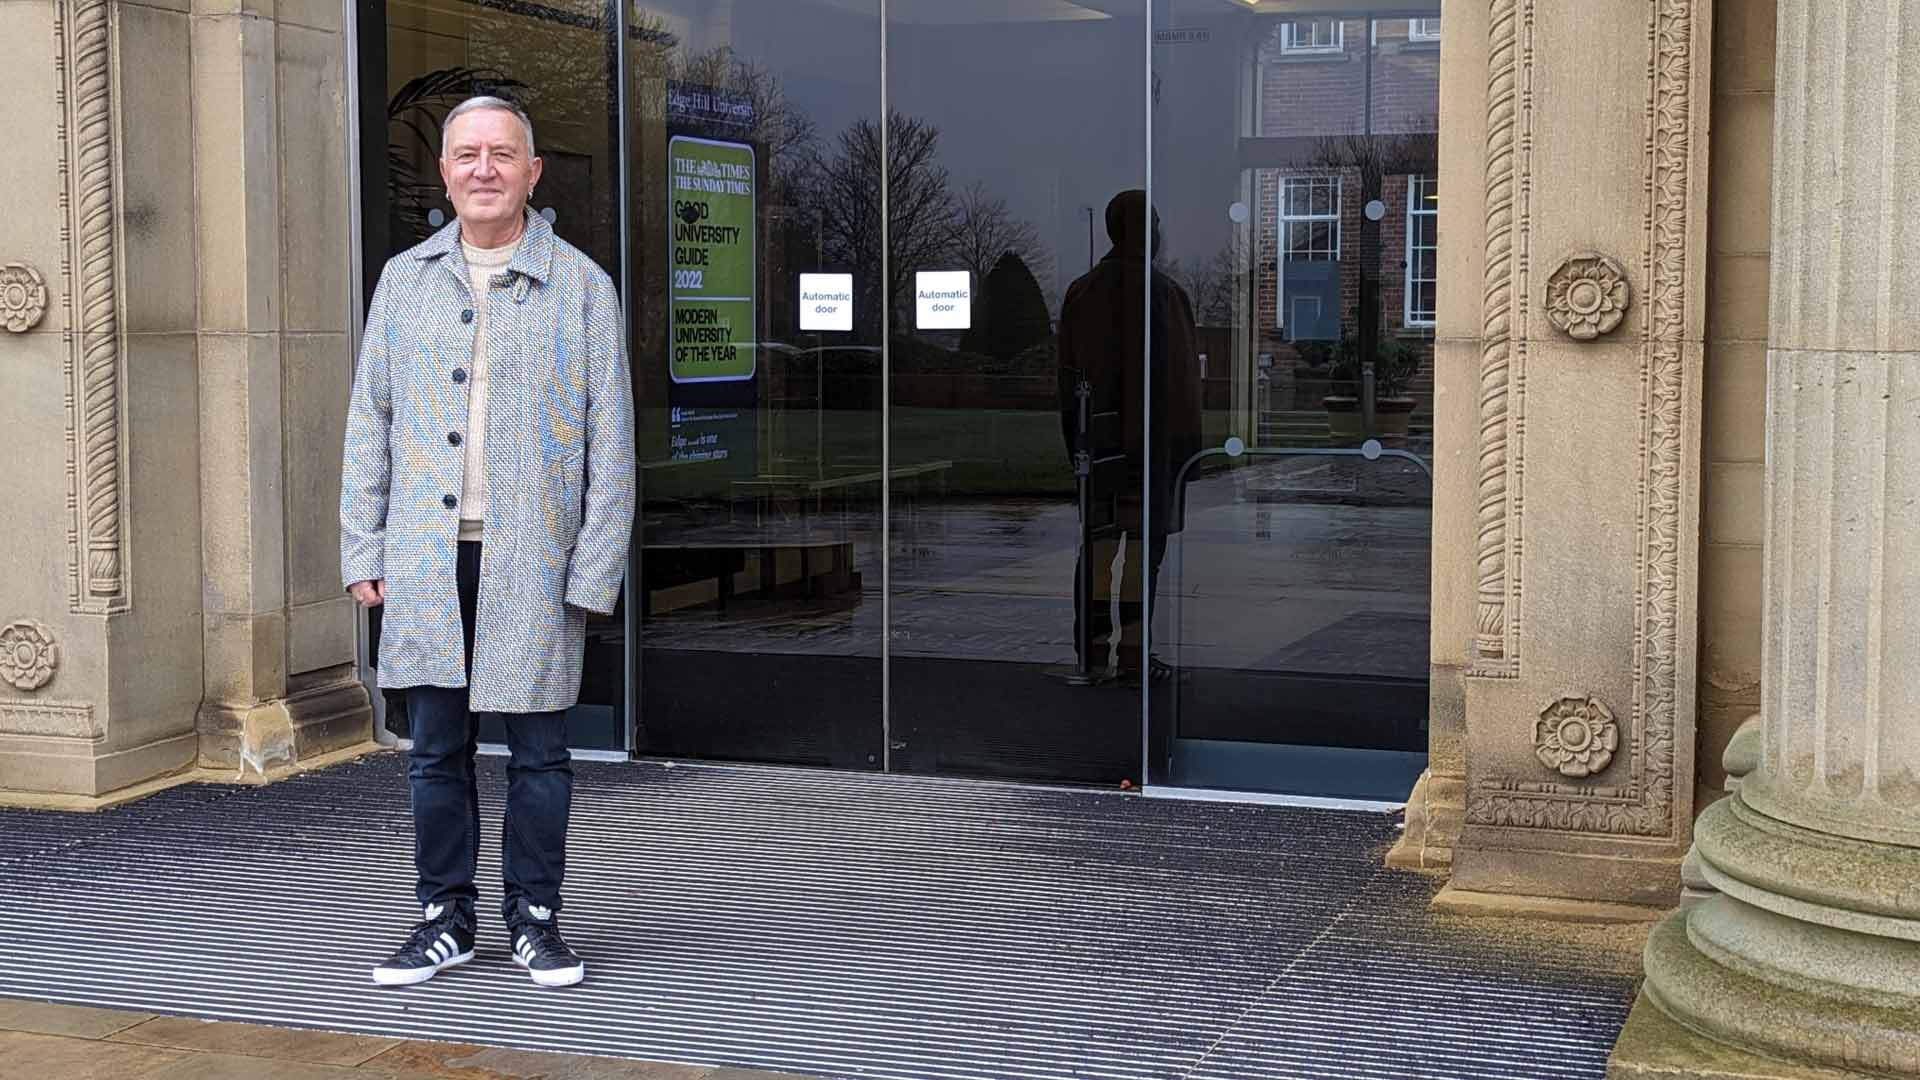 A photo of Tony Daley outside the Main Building at Edge Hill University.